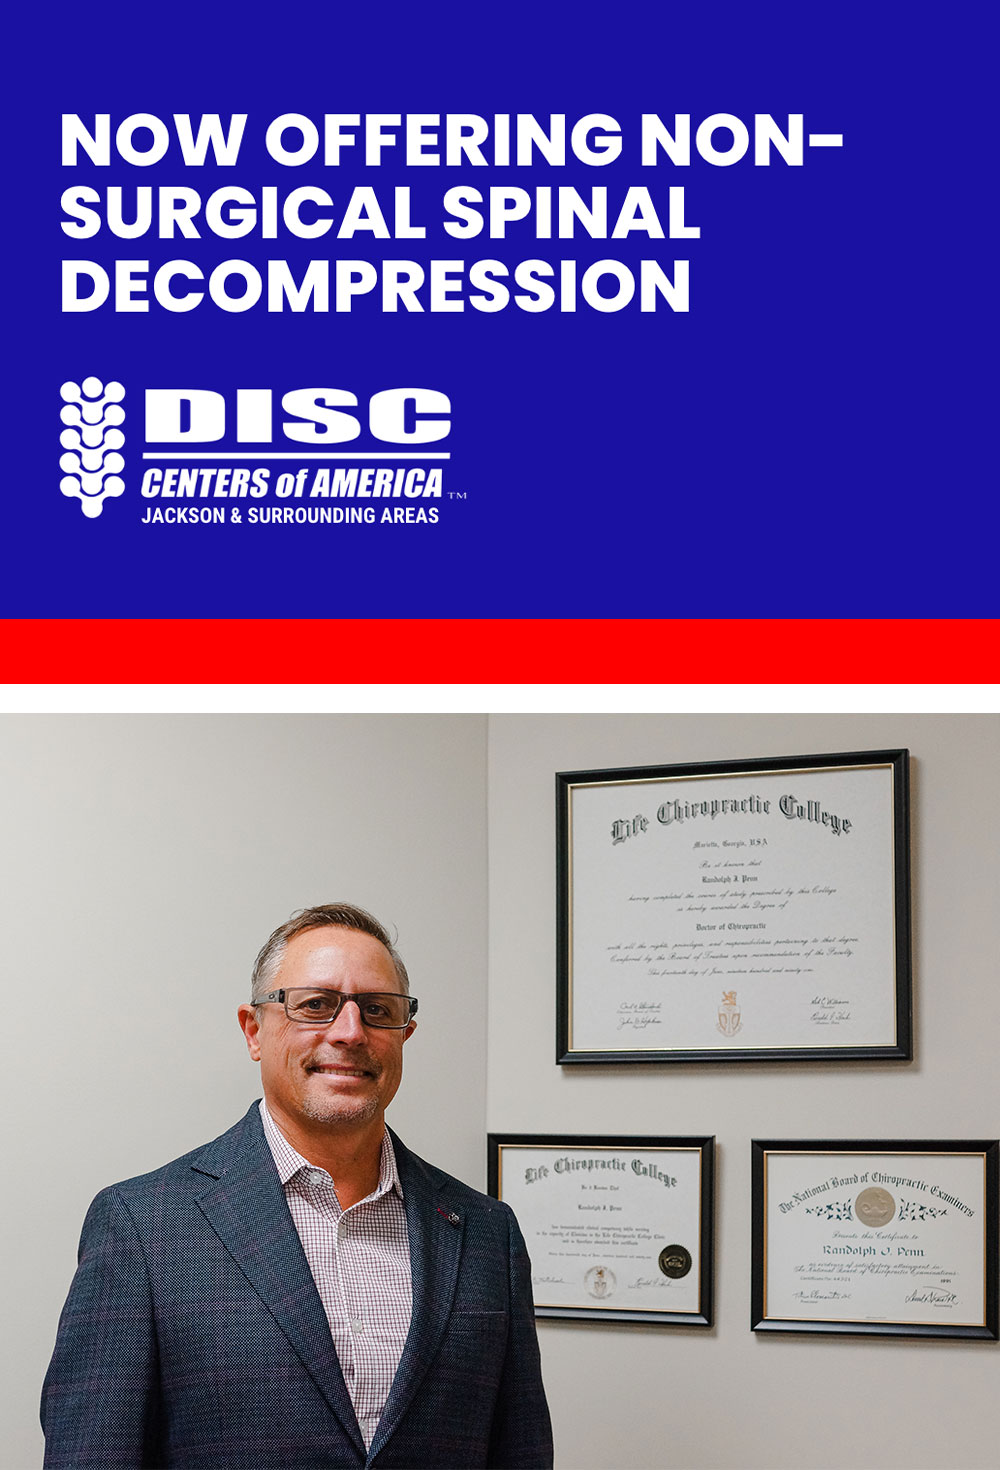 DISC Centers of America